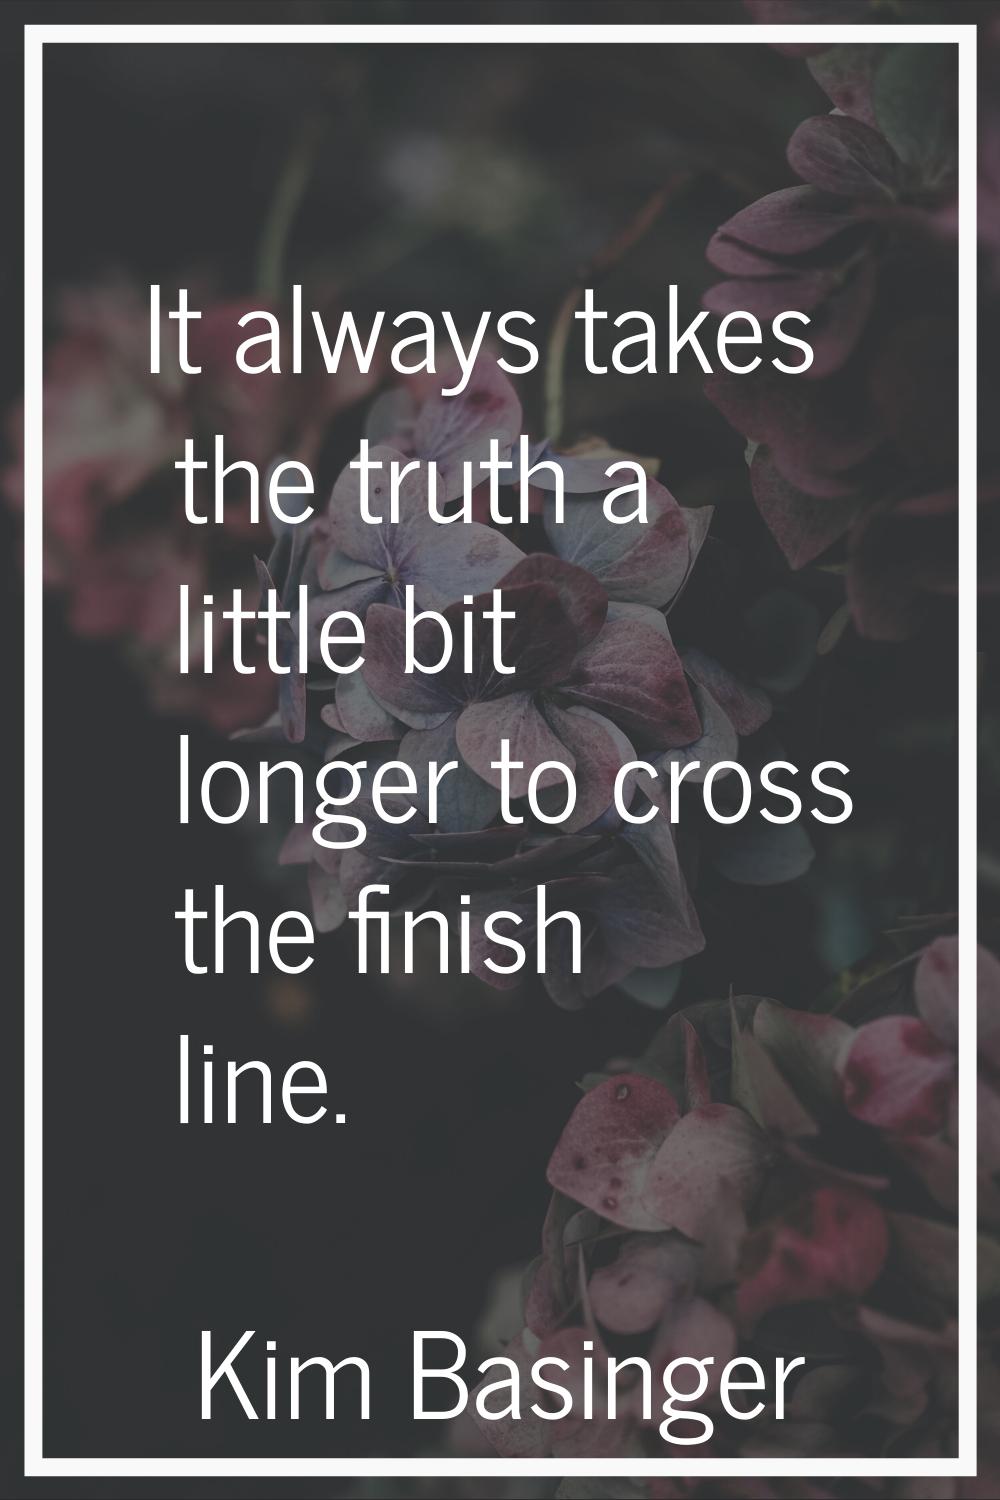 It always takes the truth a little bit longer to cross the finish line.